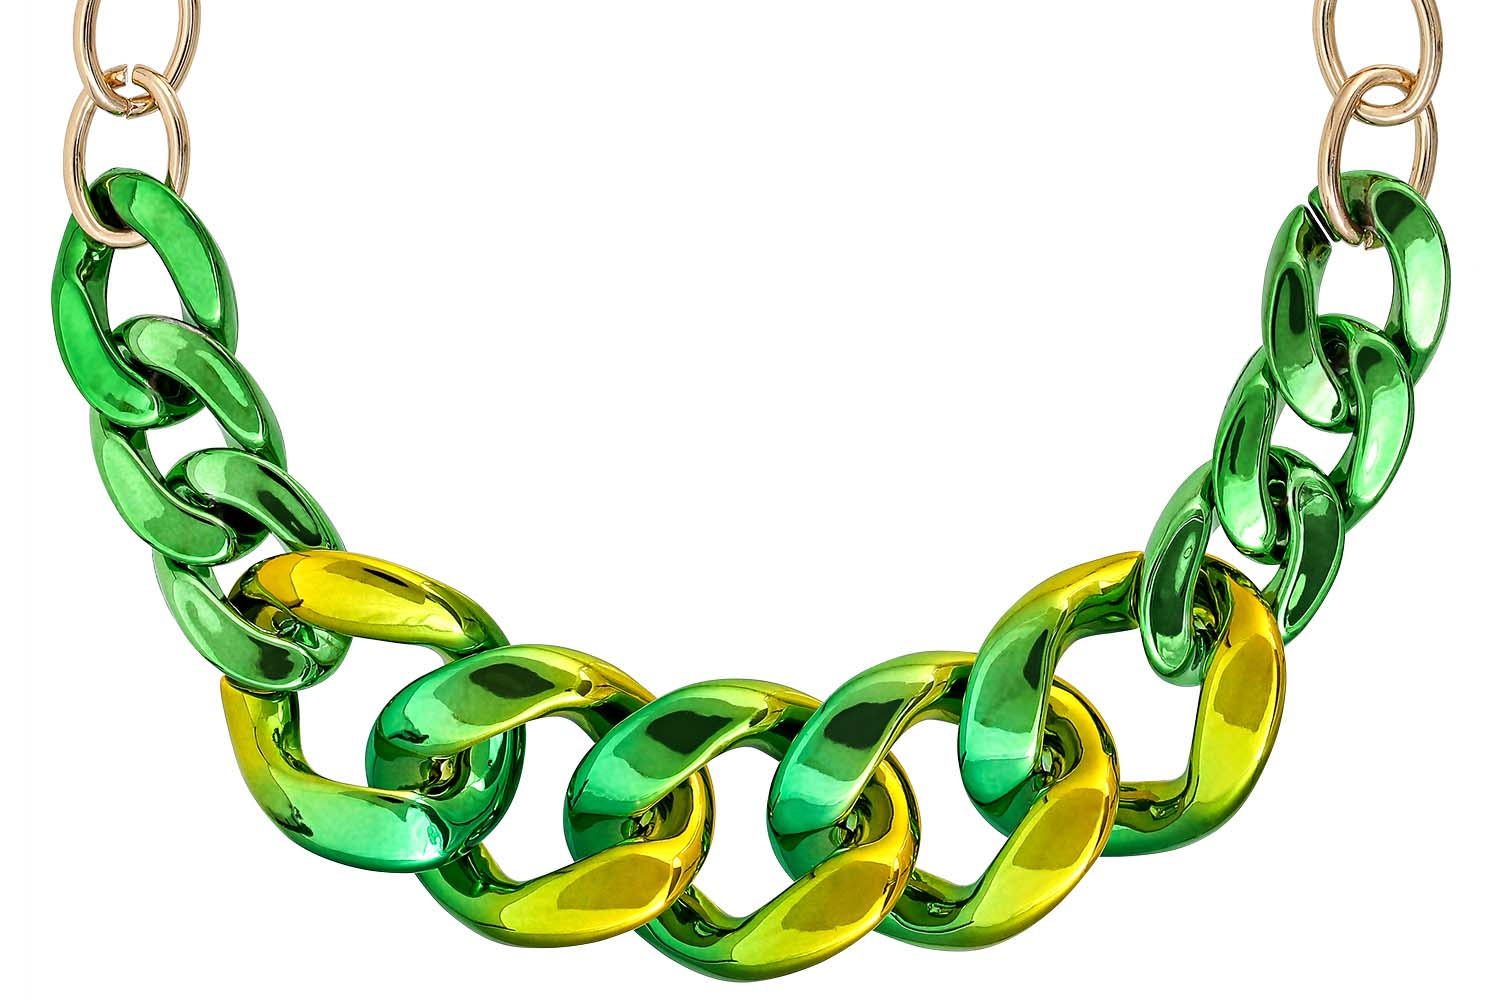 Collier - Green Chains